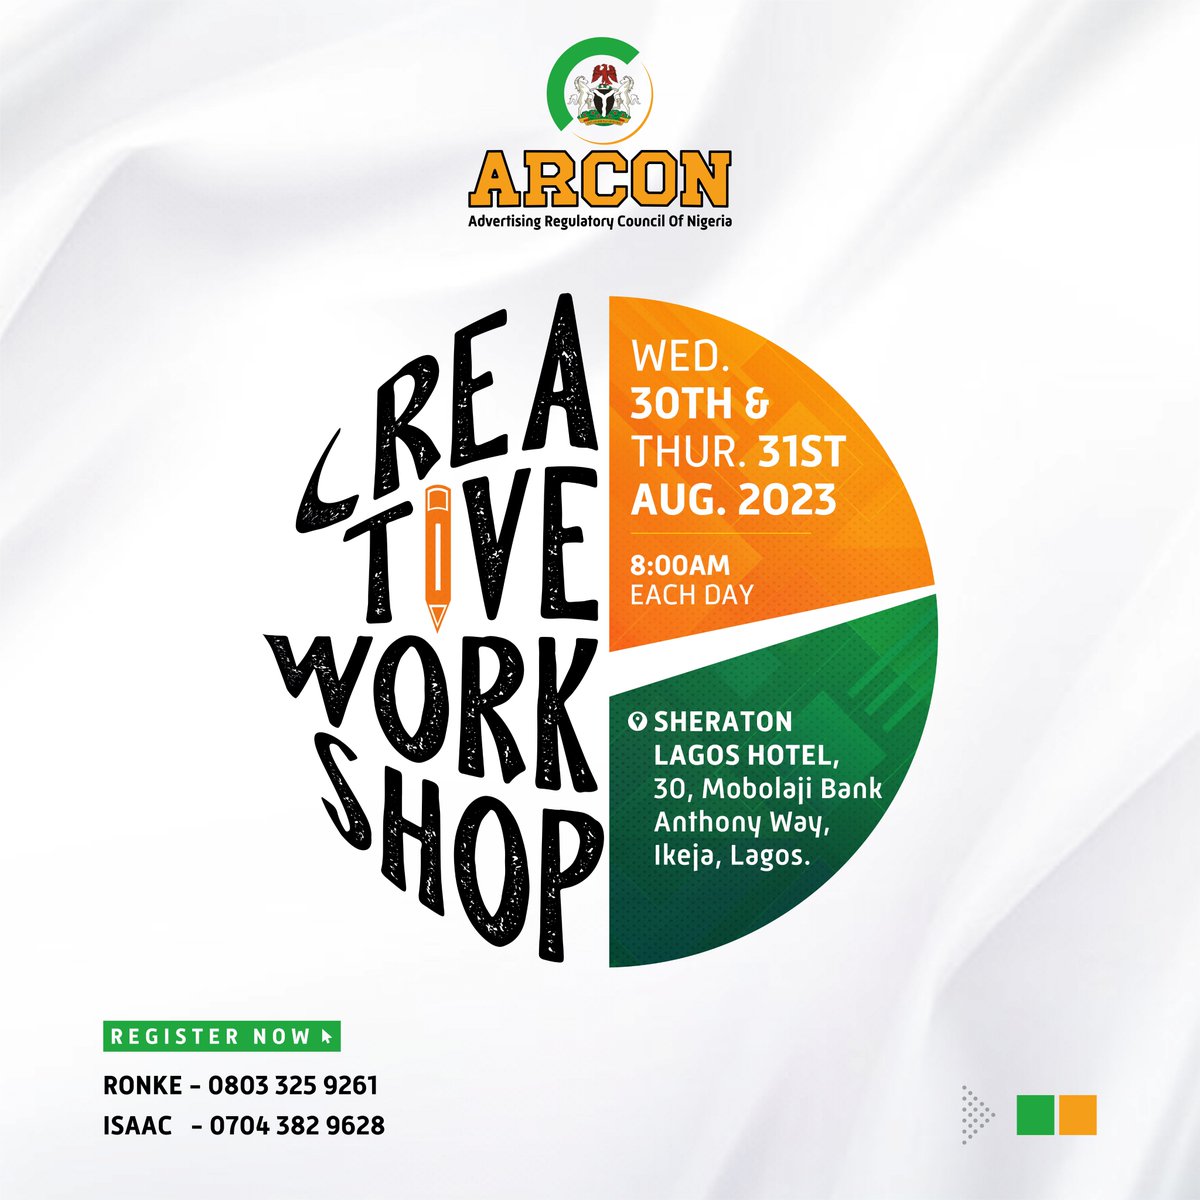 The course is designed to explore the dimensions of creativity in providing solutions to business and marketing communications challenges. 

REGISTER NOW!!!

#apcontrainings 
#apconcares 
#advertising #advertisingprofessionals 
#AdvertisingIndustry
#marketingcommunications